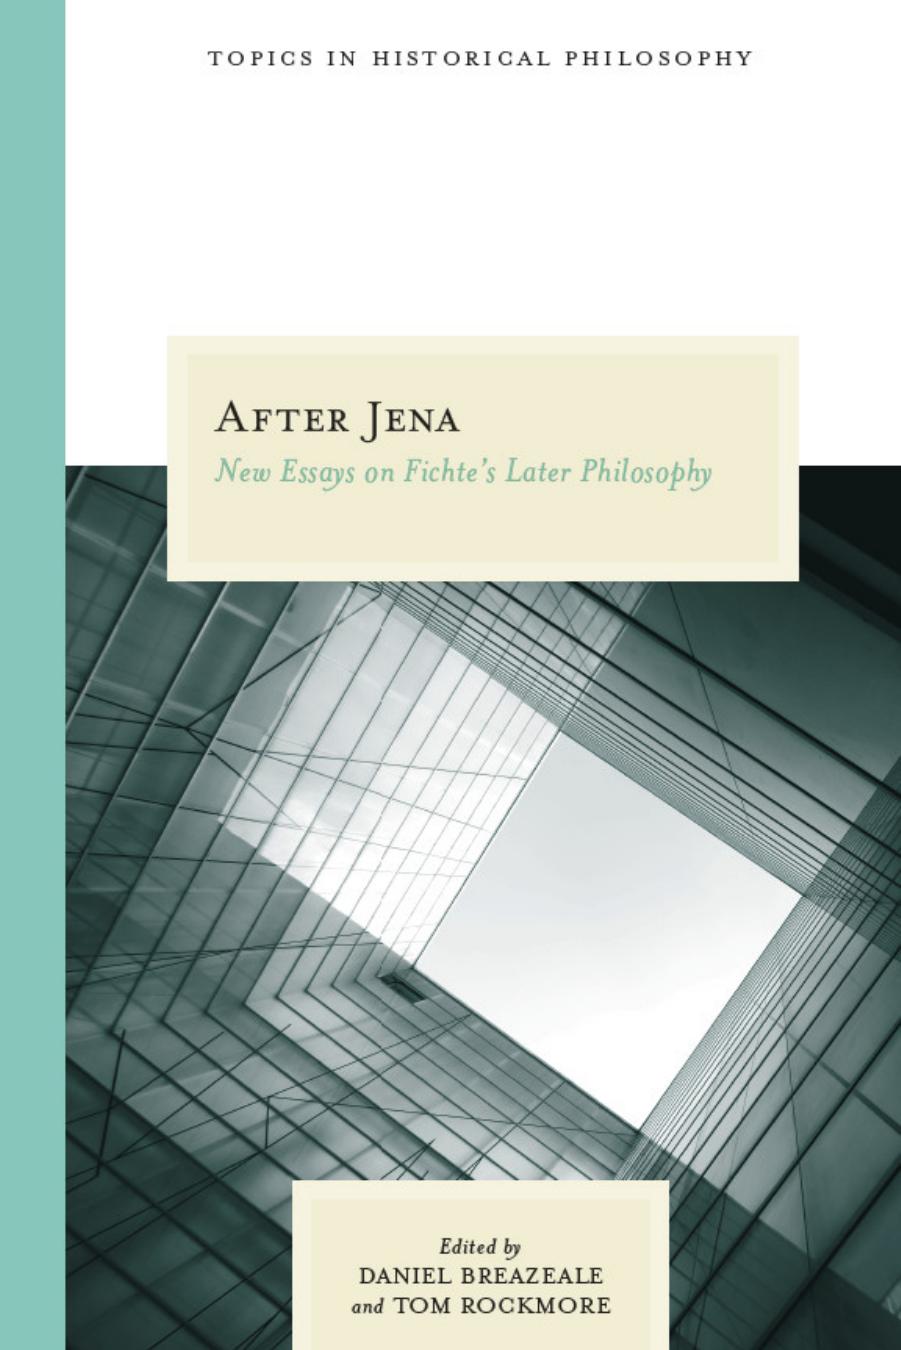 After Jena: New Essays on Fichte's Later Philosophy